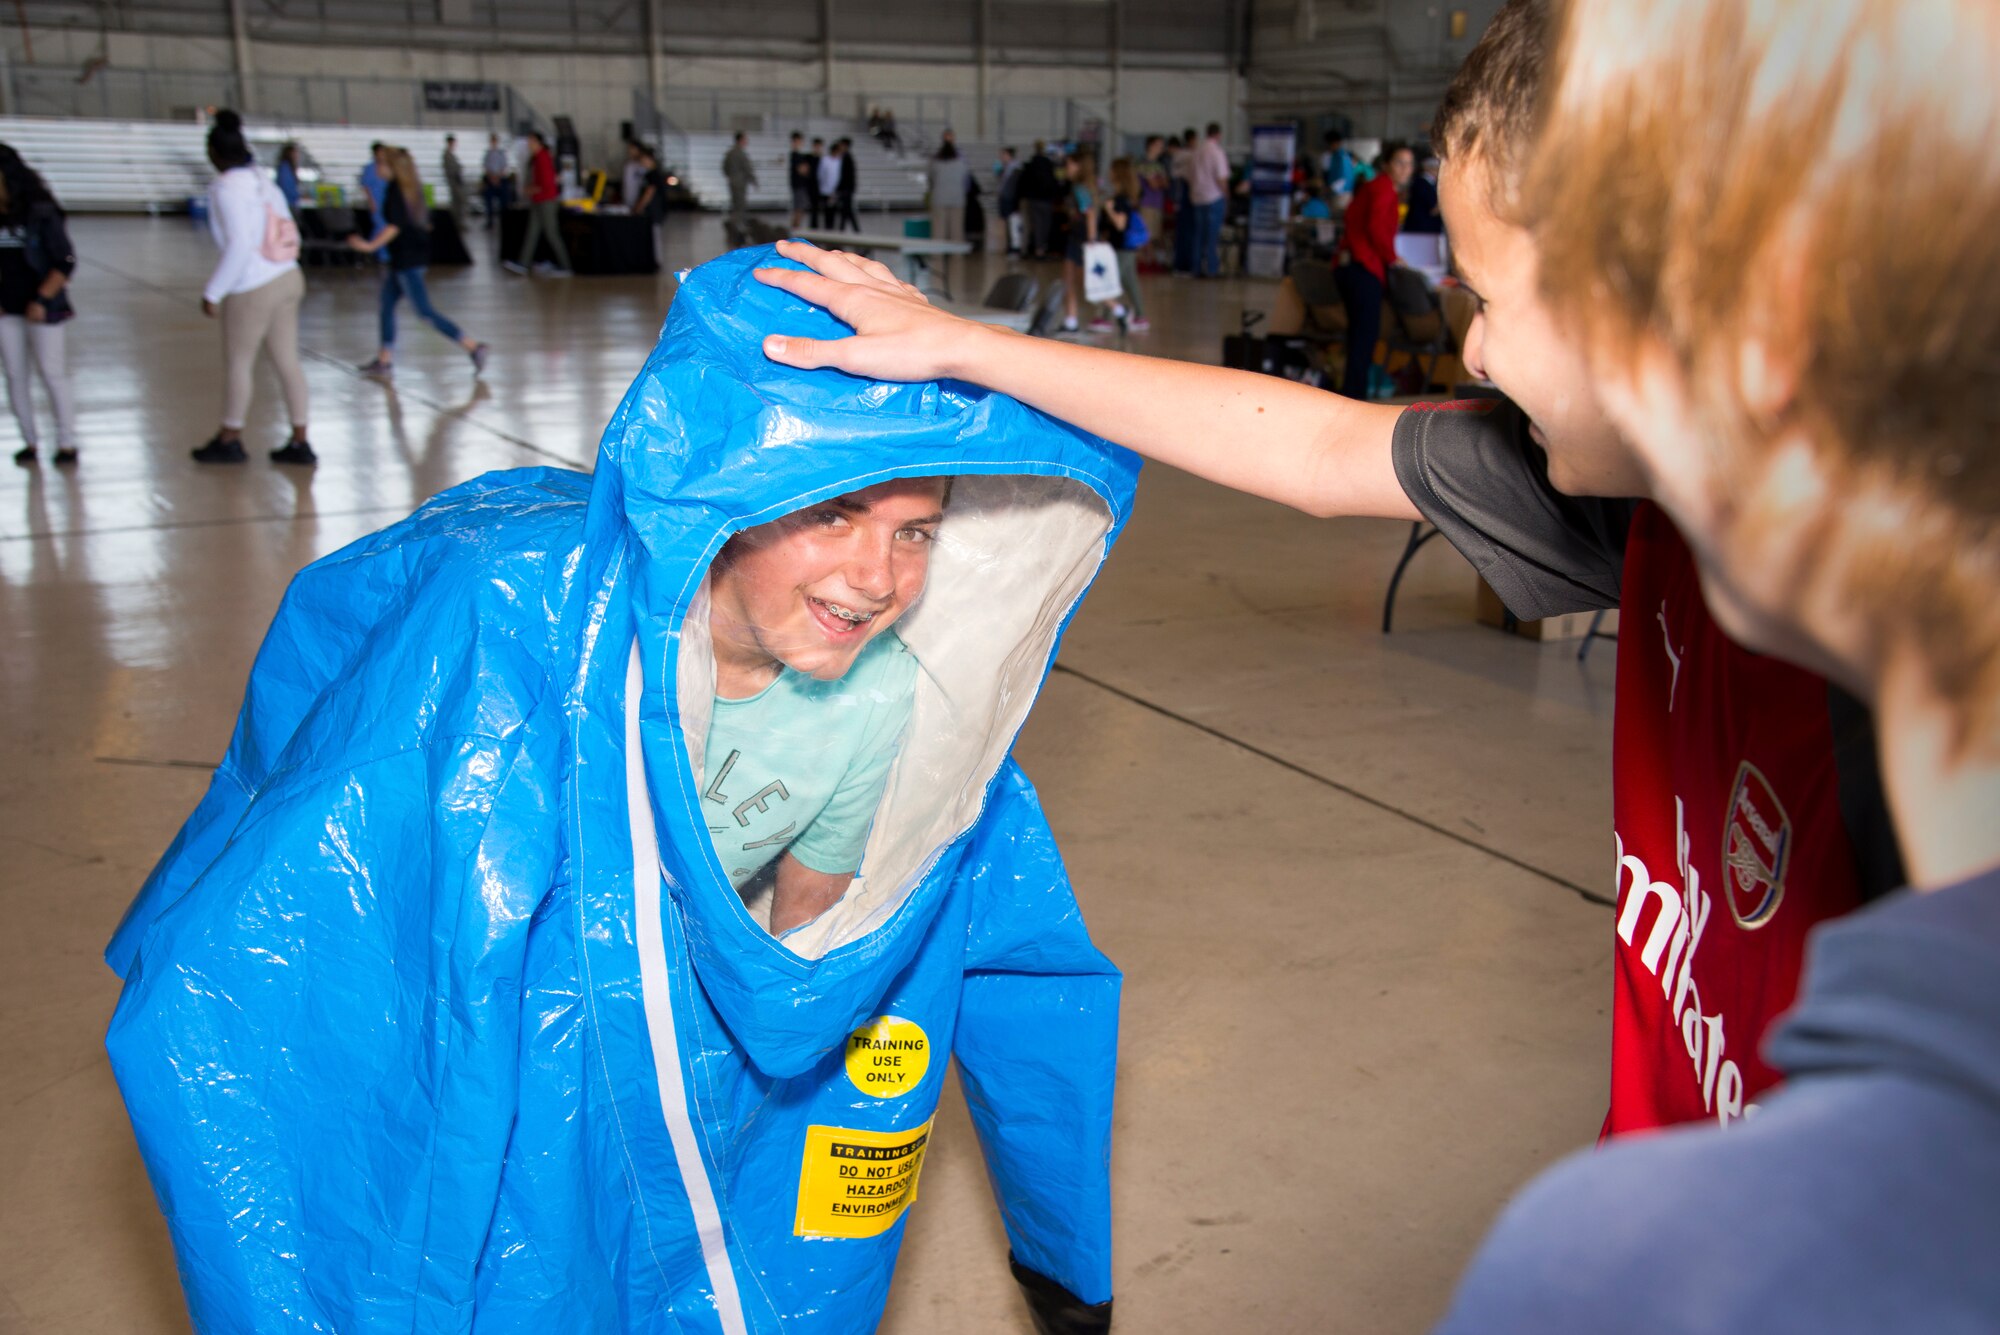 A Florida student tries on an occupational safety health administration (OSHA) level “A” suit during the Science, Technology, Engineering, Arts and Math (STEAM) Day at MacDill Air Force Base, Fla., March 21, 2018.